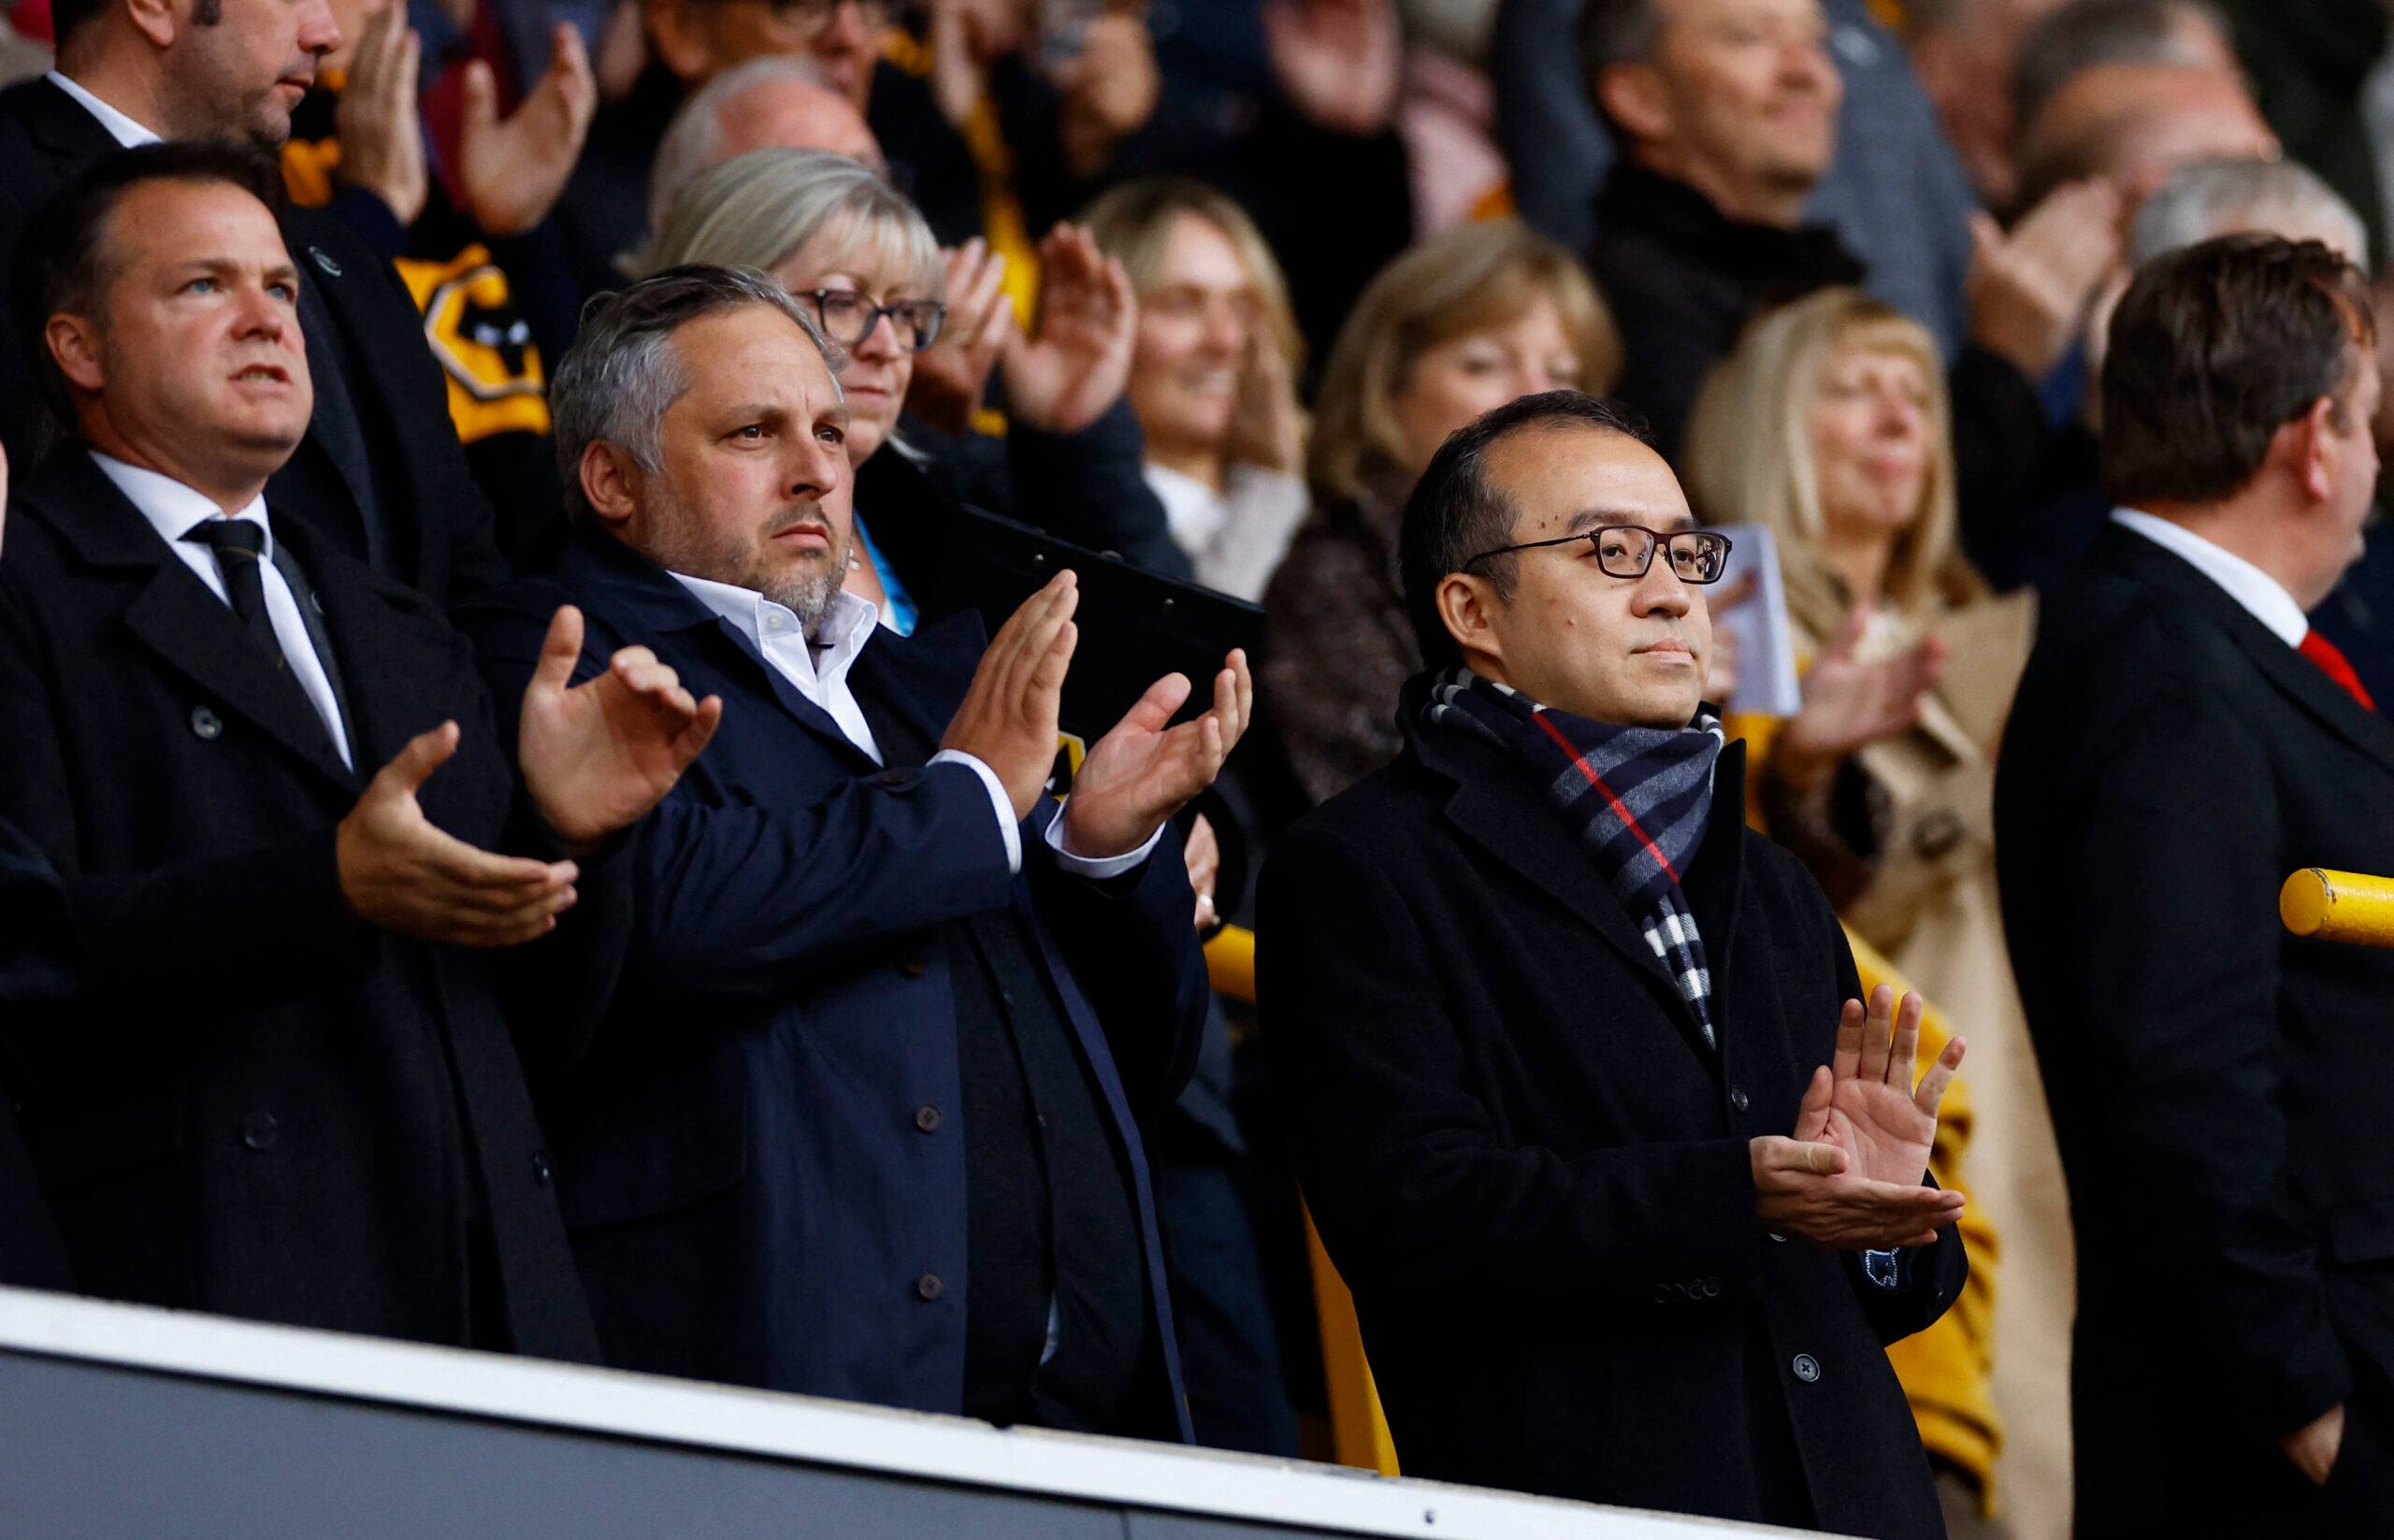 Fosun Group chairman Guo Guangchang in the stands at Wolves vs Nottingham Forest